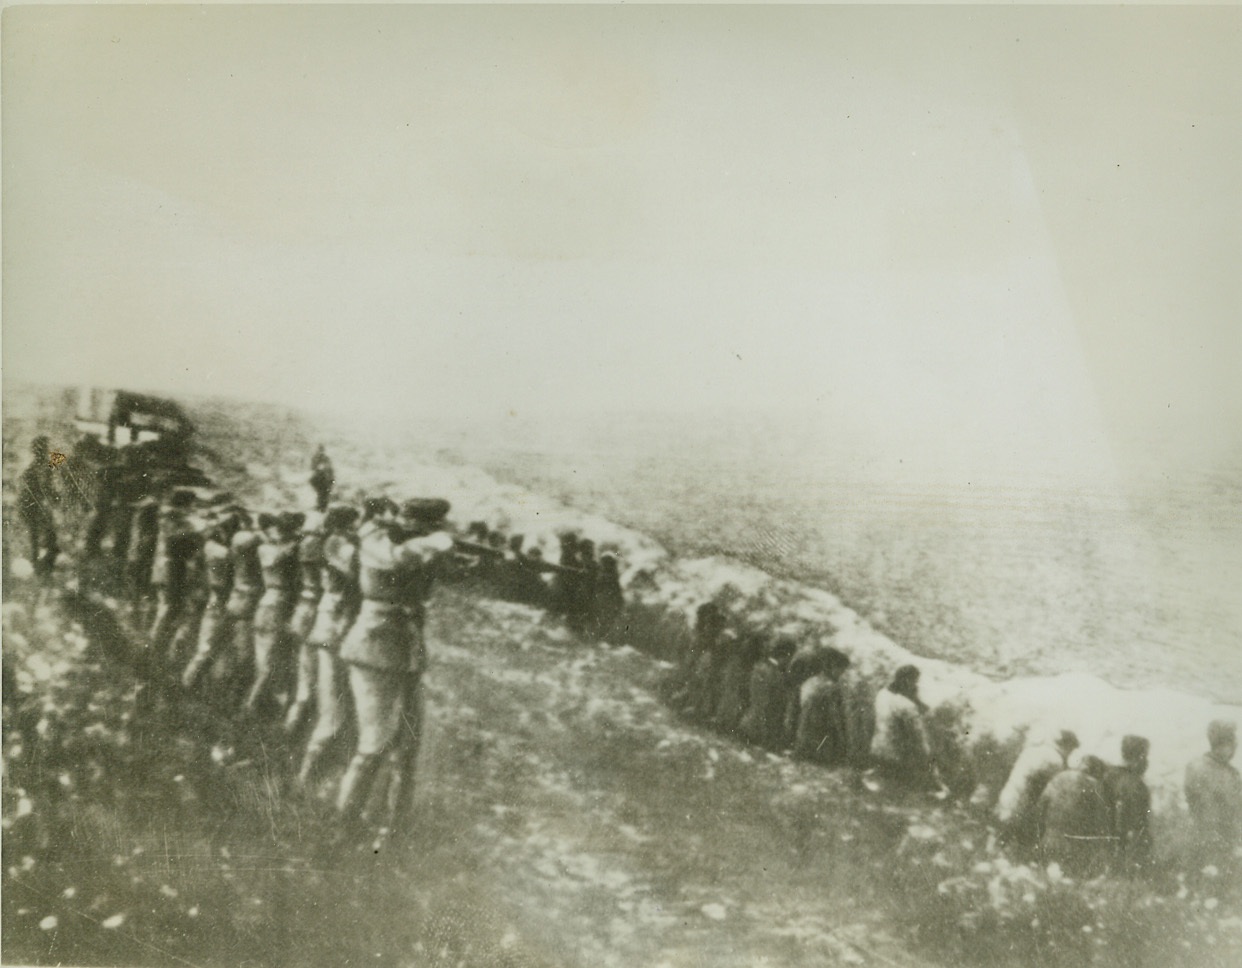 Nazis Execute Soviet Civilians, 9/27/1942. Russia – A German soldier proudly carried this picture. A long line of captured Soviet civilians sit beside their own mass grave, awaiting execution from the Nazi firing squad. The photo was taken from the body of a Nazi officer. Credit: (ACME);